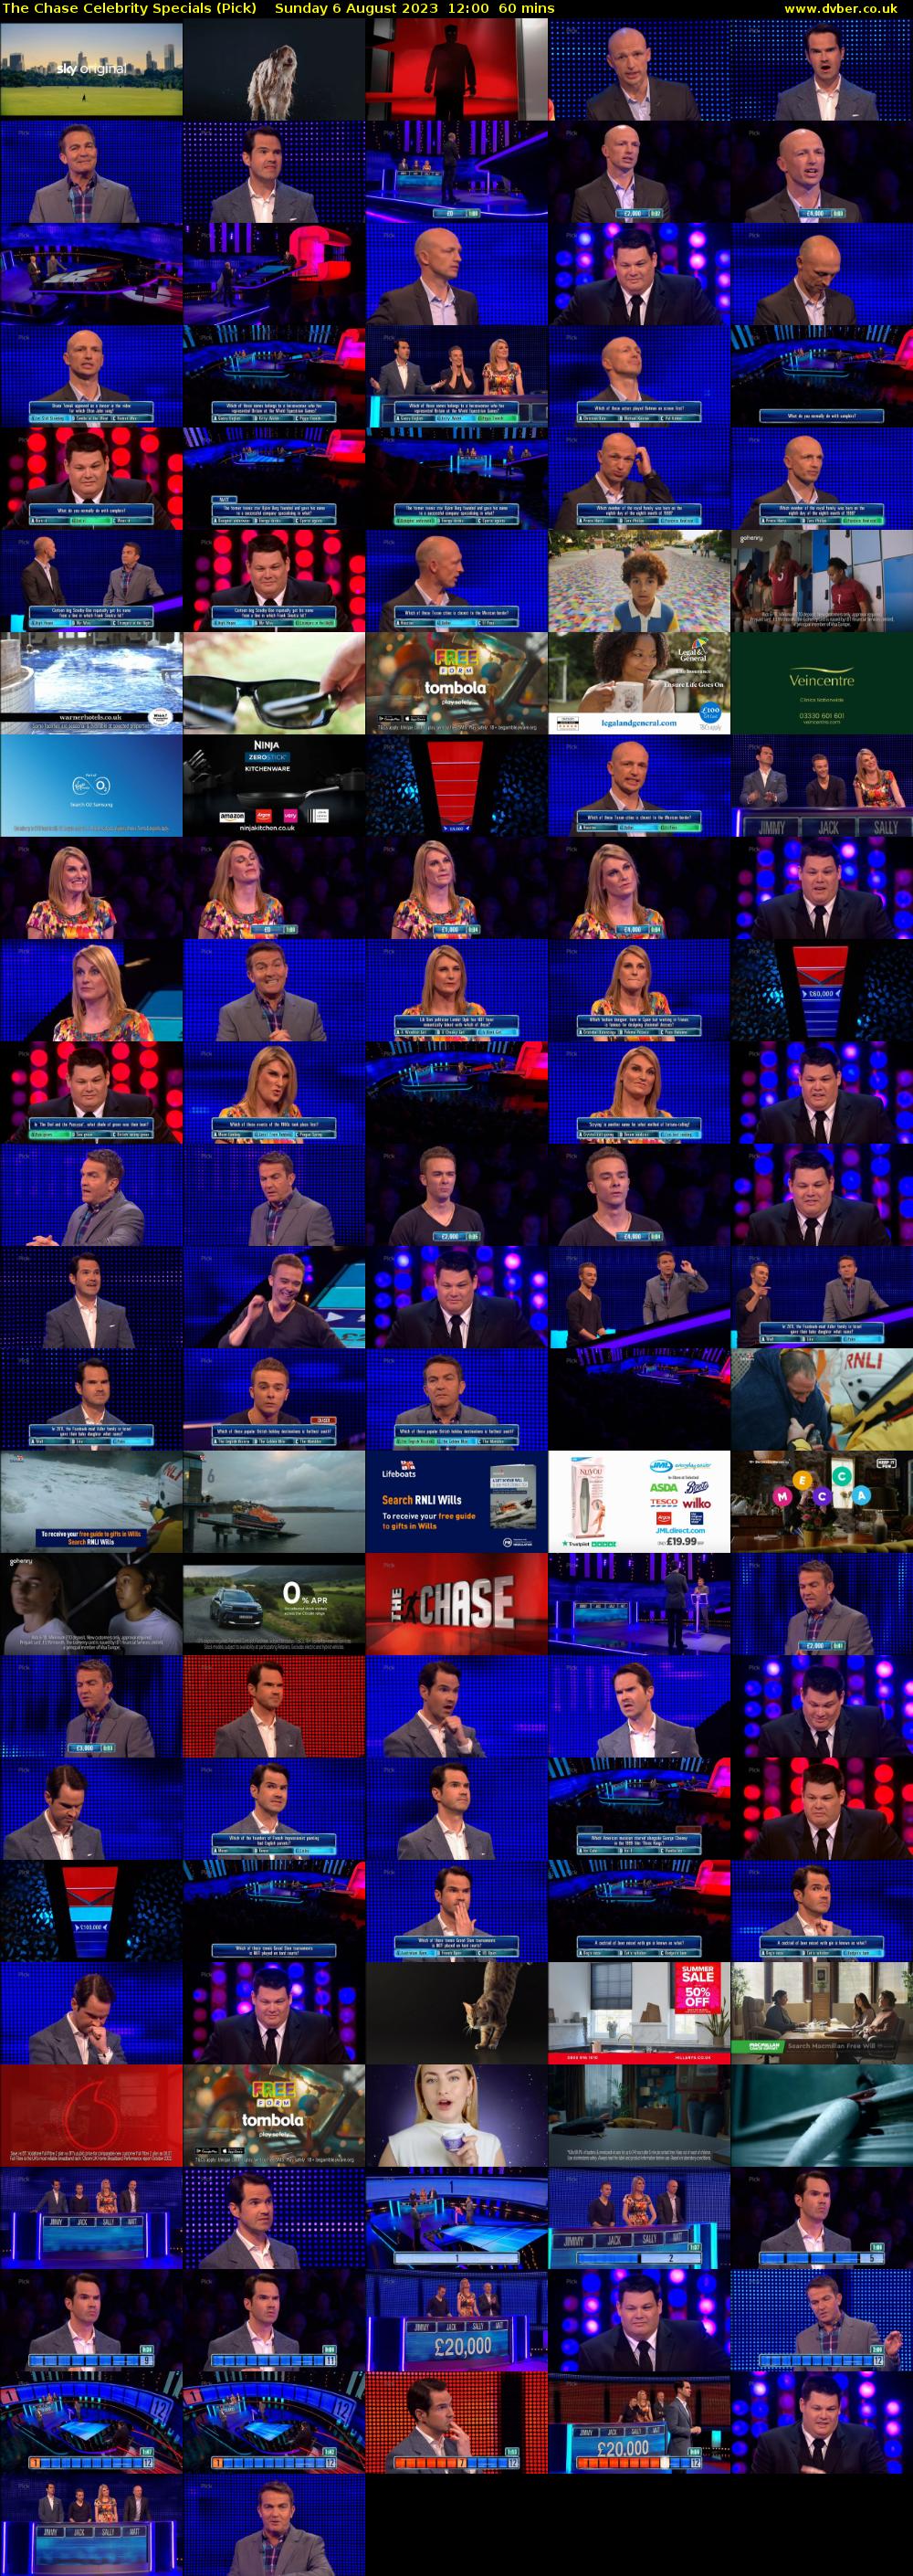 The Chase Celebrity Specials (Pick) Sunday 6 August 2023 12:00 - 13:00